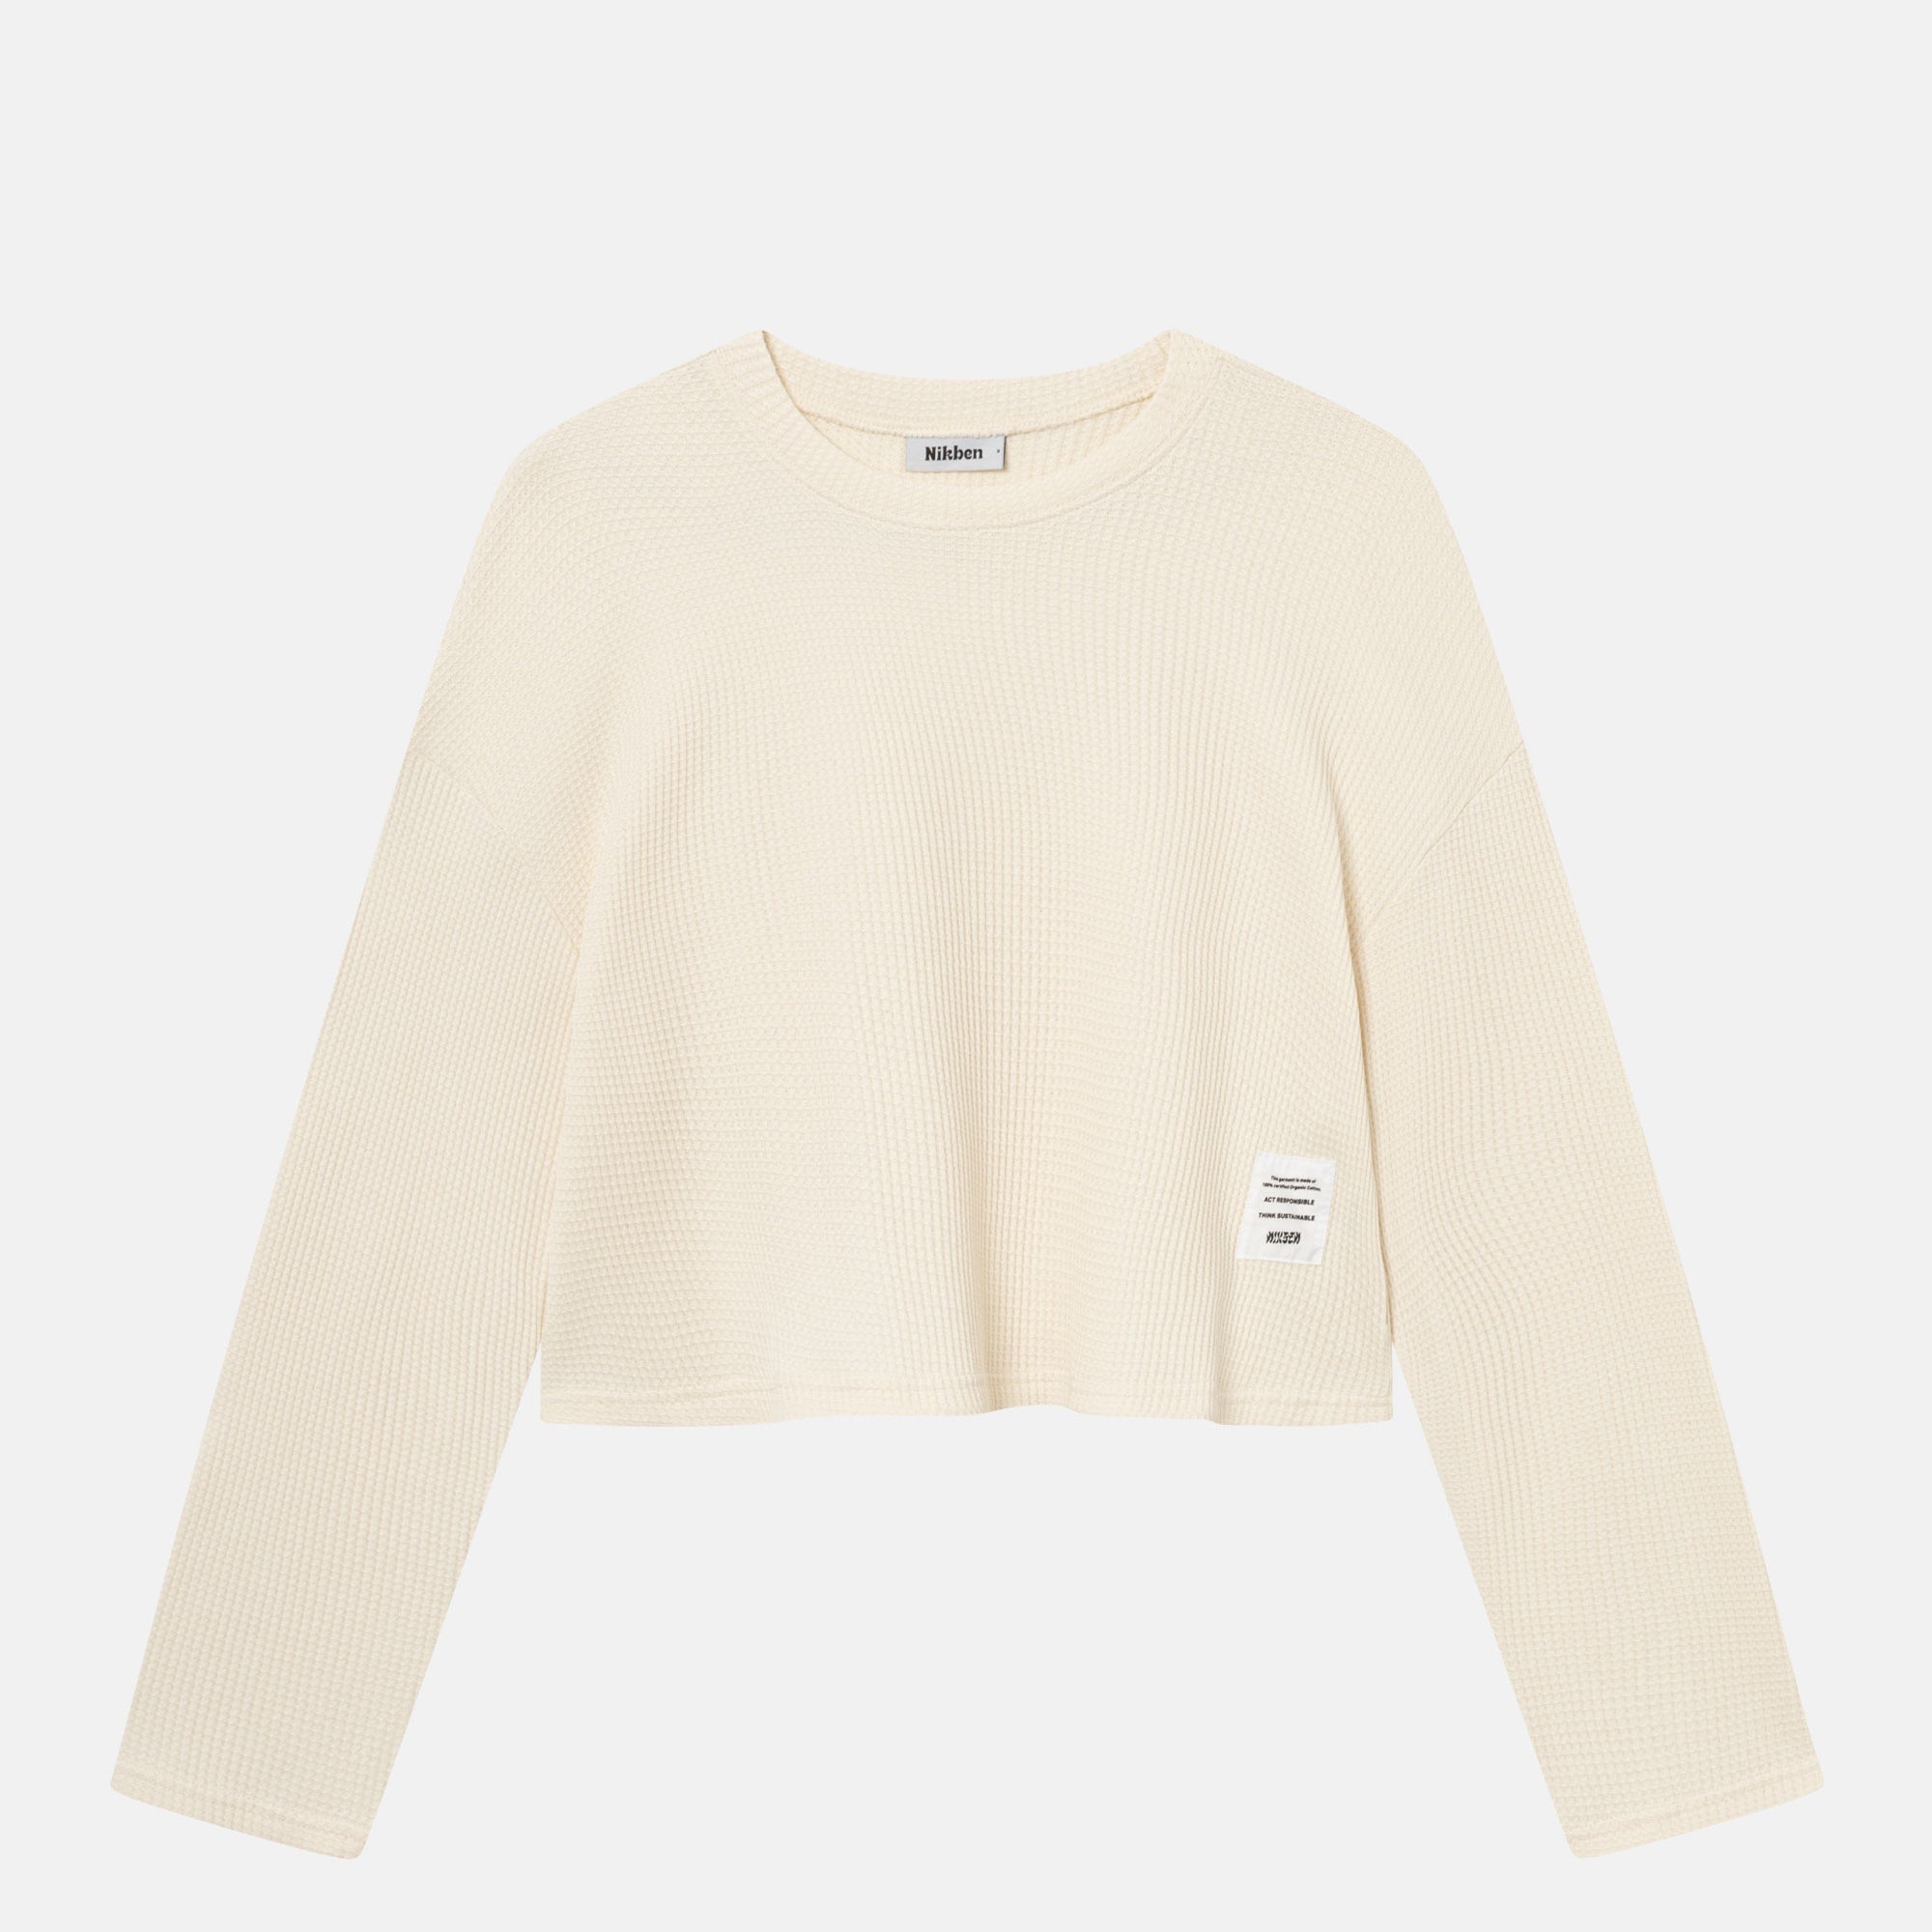 Off-white waffle-patterned cropped sweatshirt with a stitched-on material label.